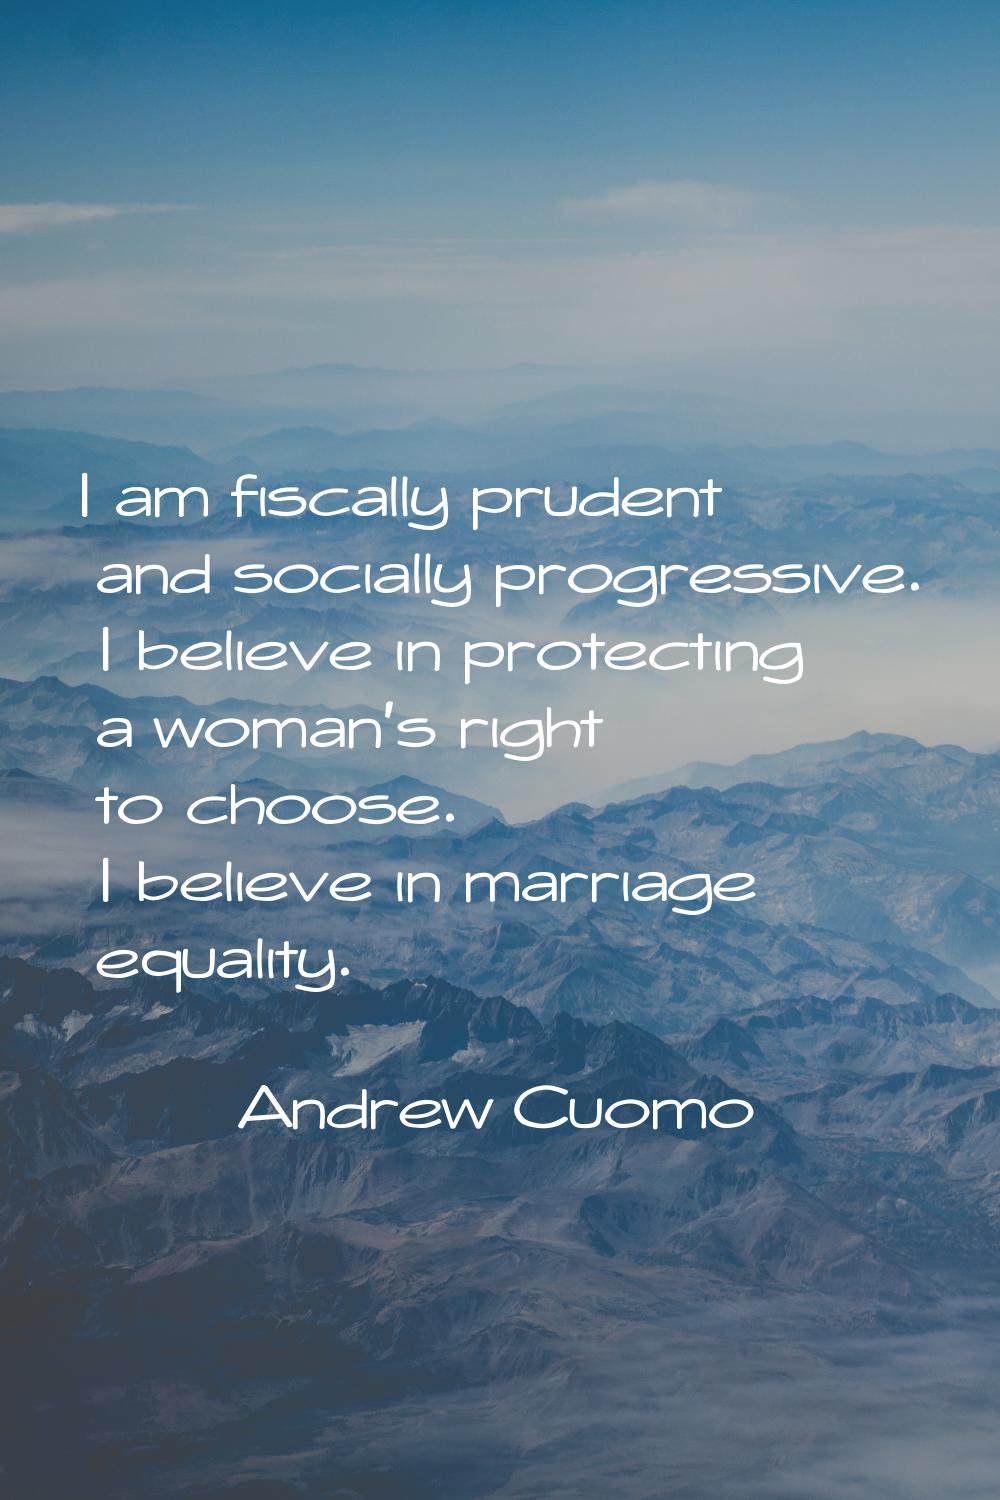 I am fiscally prudent and socially progressive. I believe in protecting a woman's right to choose. 